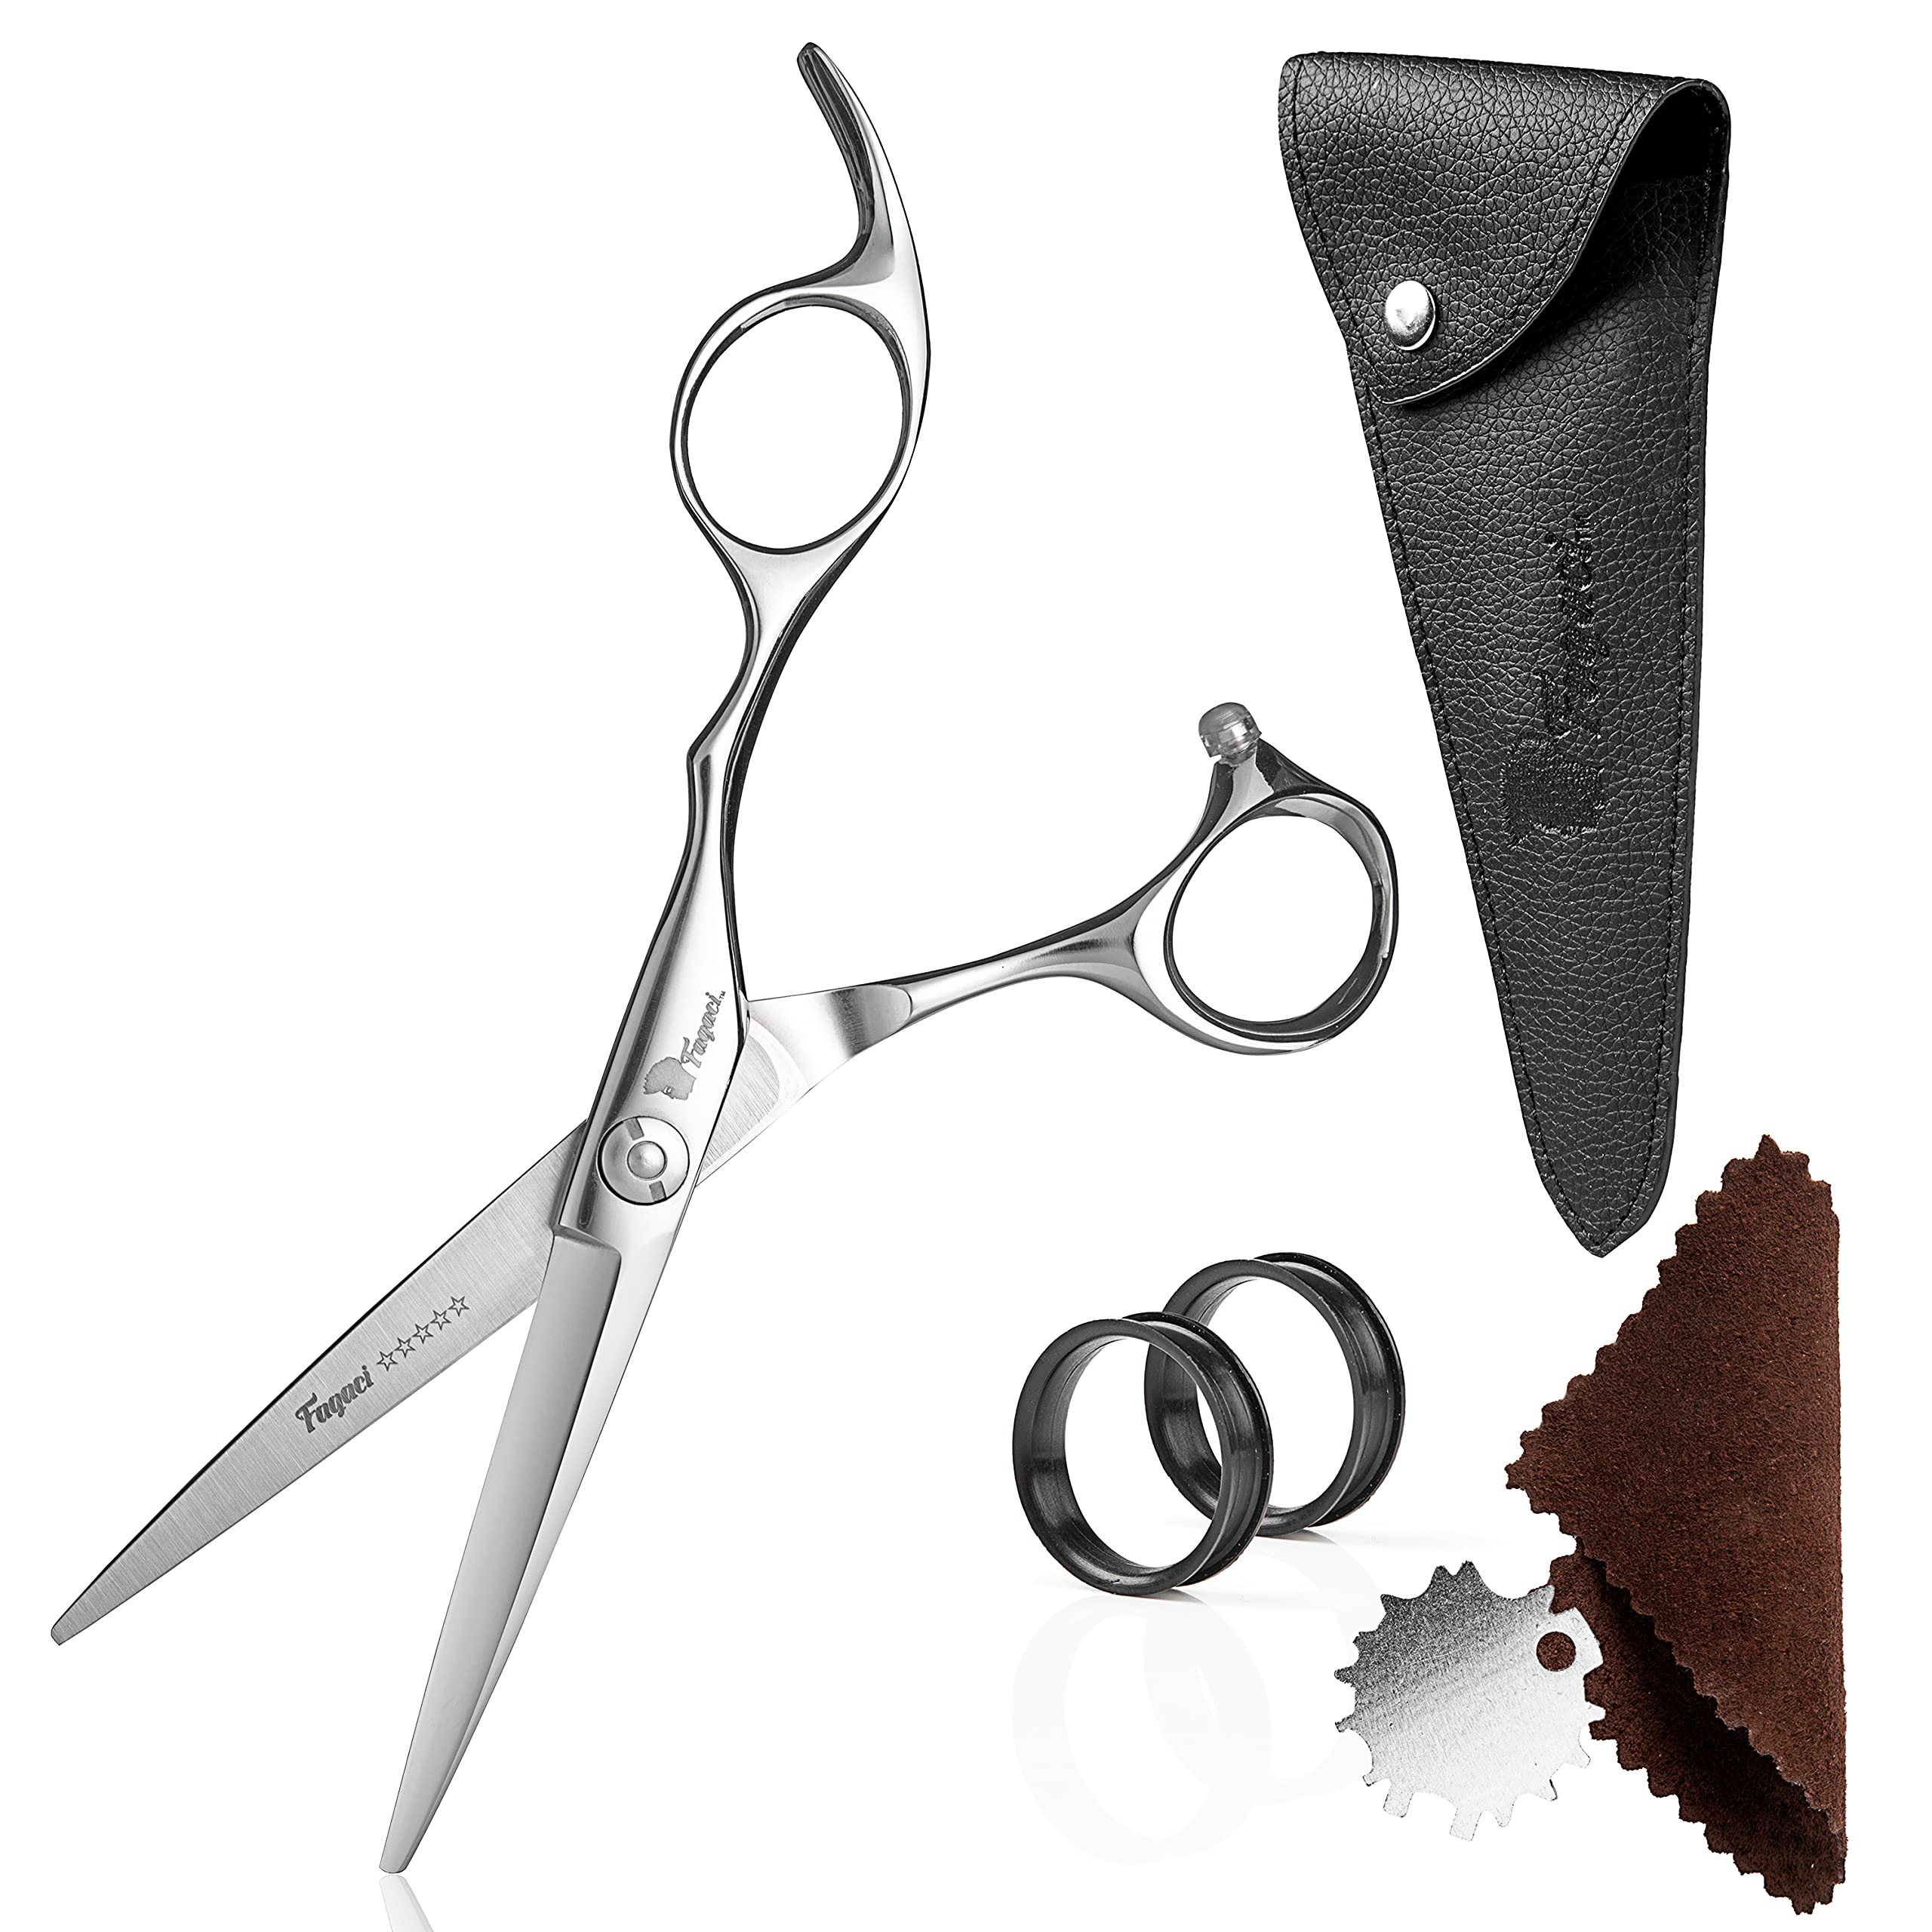 Professional Hair Scissors 5.5 Inch with Extremely Sharp Blades, 440C Steel  Hair Cutting Scissors, Durable, Smooth Motion & Fine Cut, Barber Scissors  with Elegant Sheath, Cleaning Leather & Key Hair Cutting Scissors